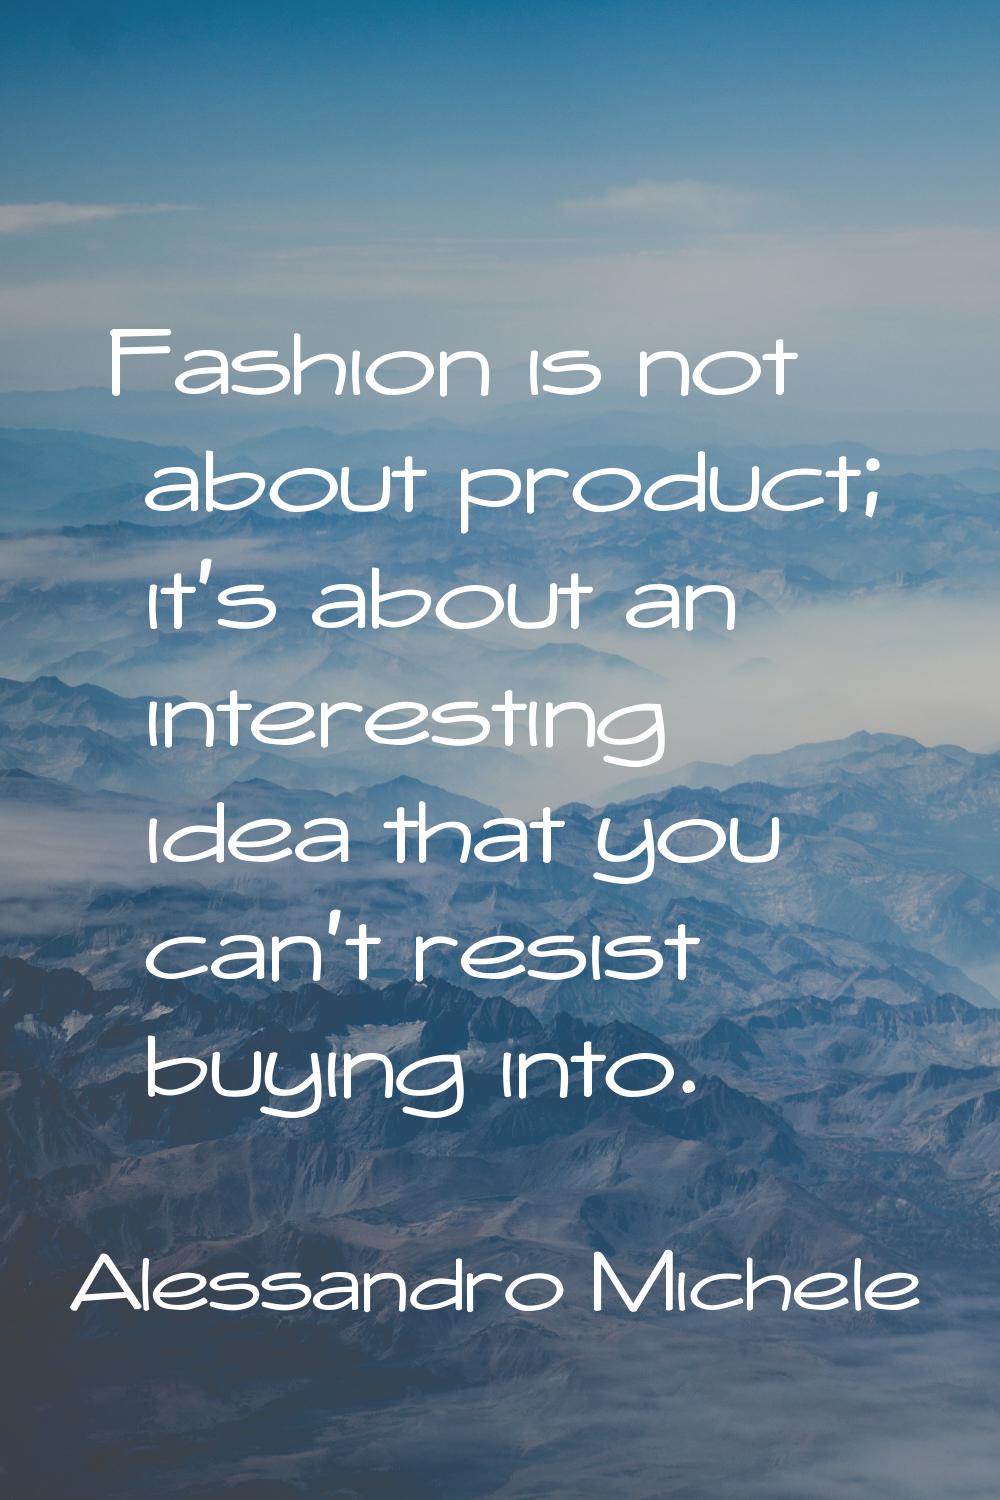 Fashion is not about product; it's about an interesting idea that you can't resist buying into.